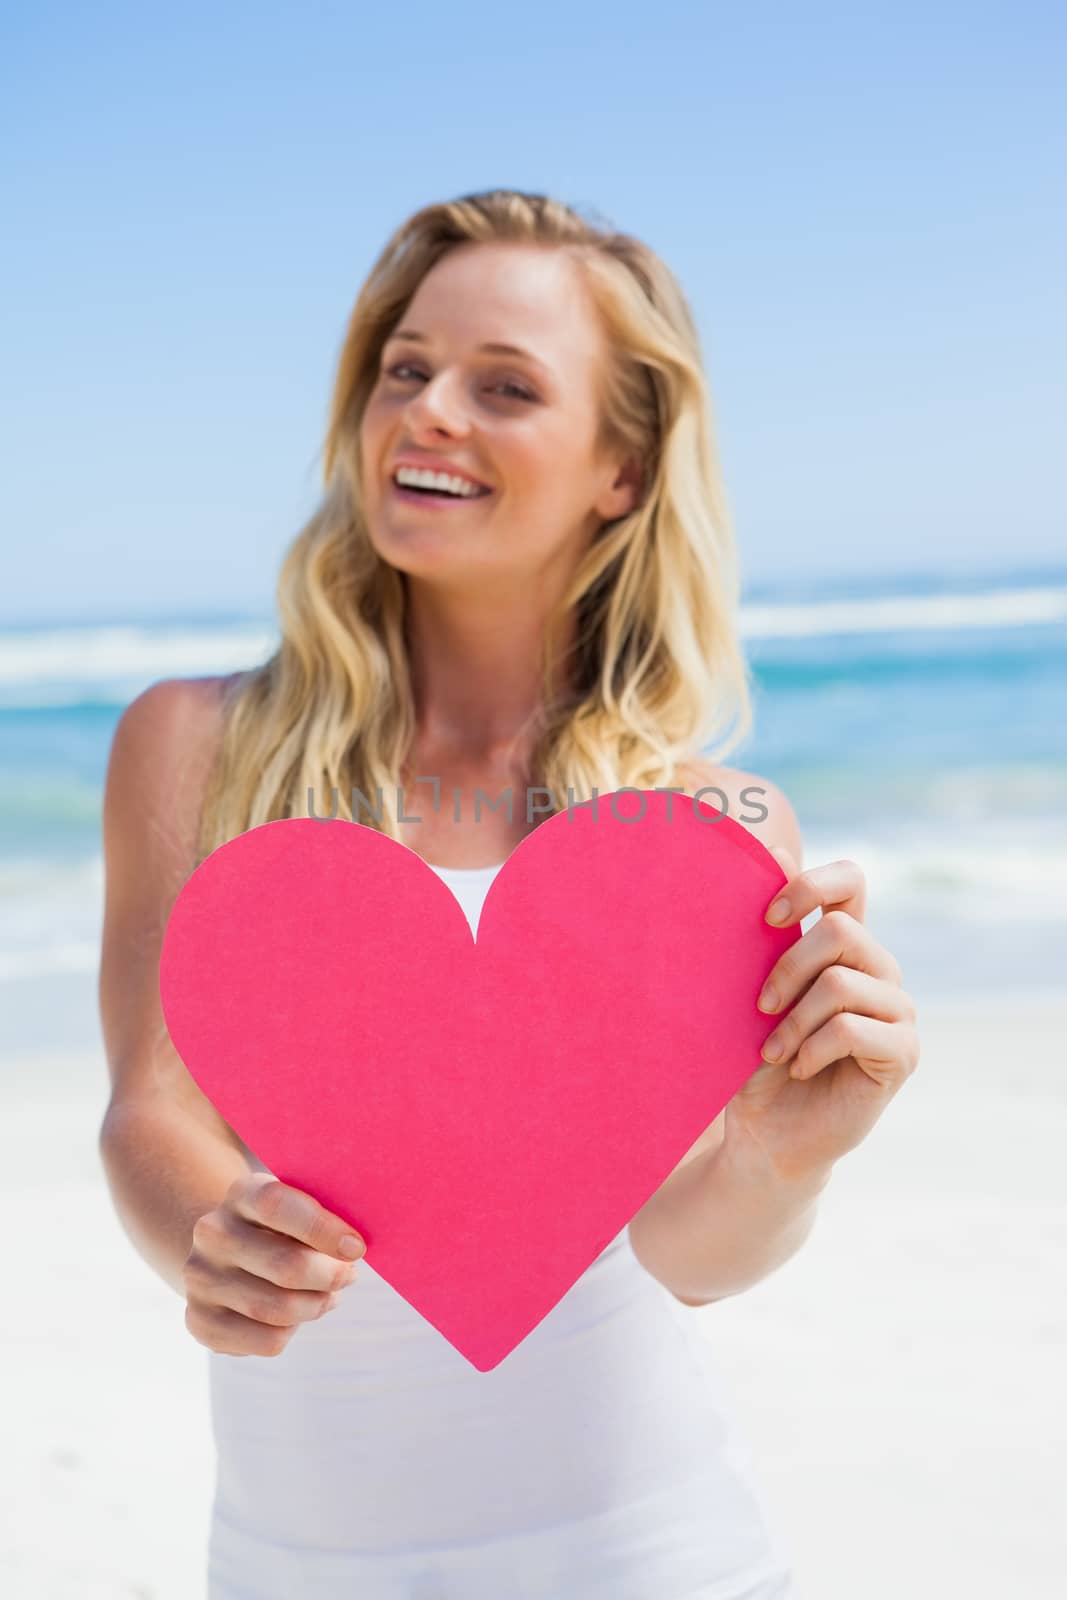 Smiling blonde showing pink heart on the beach on a sunny day